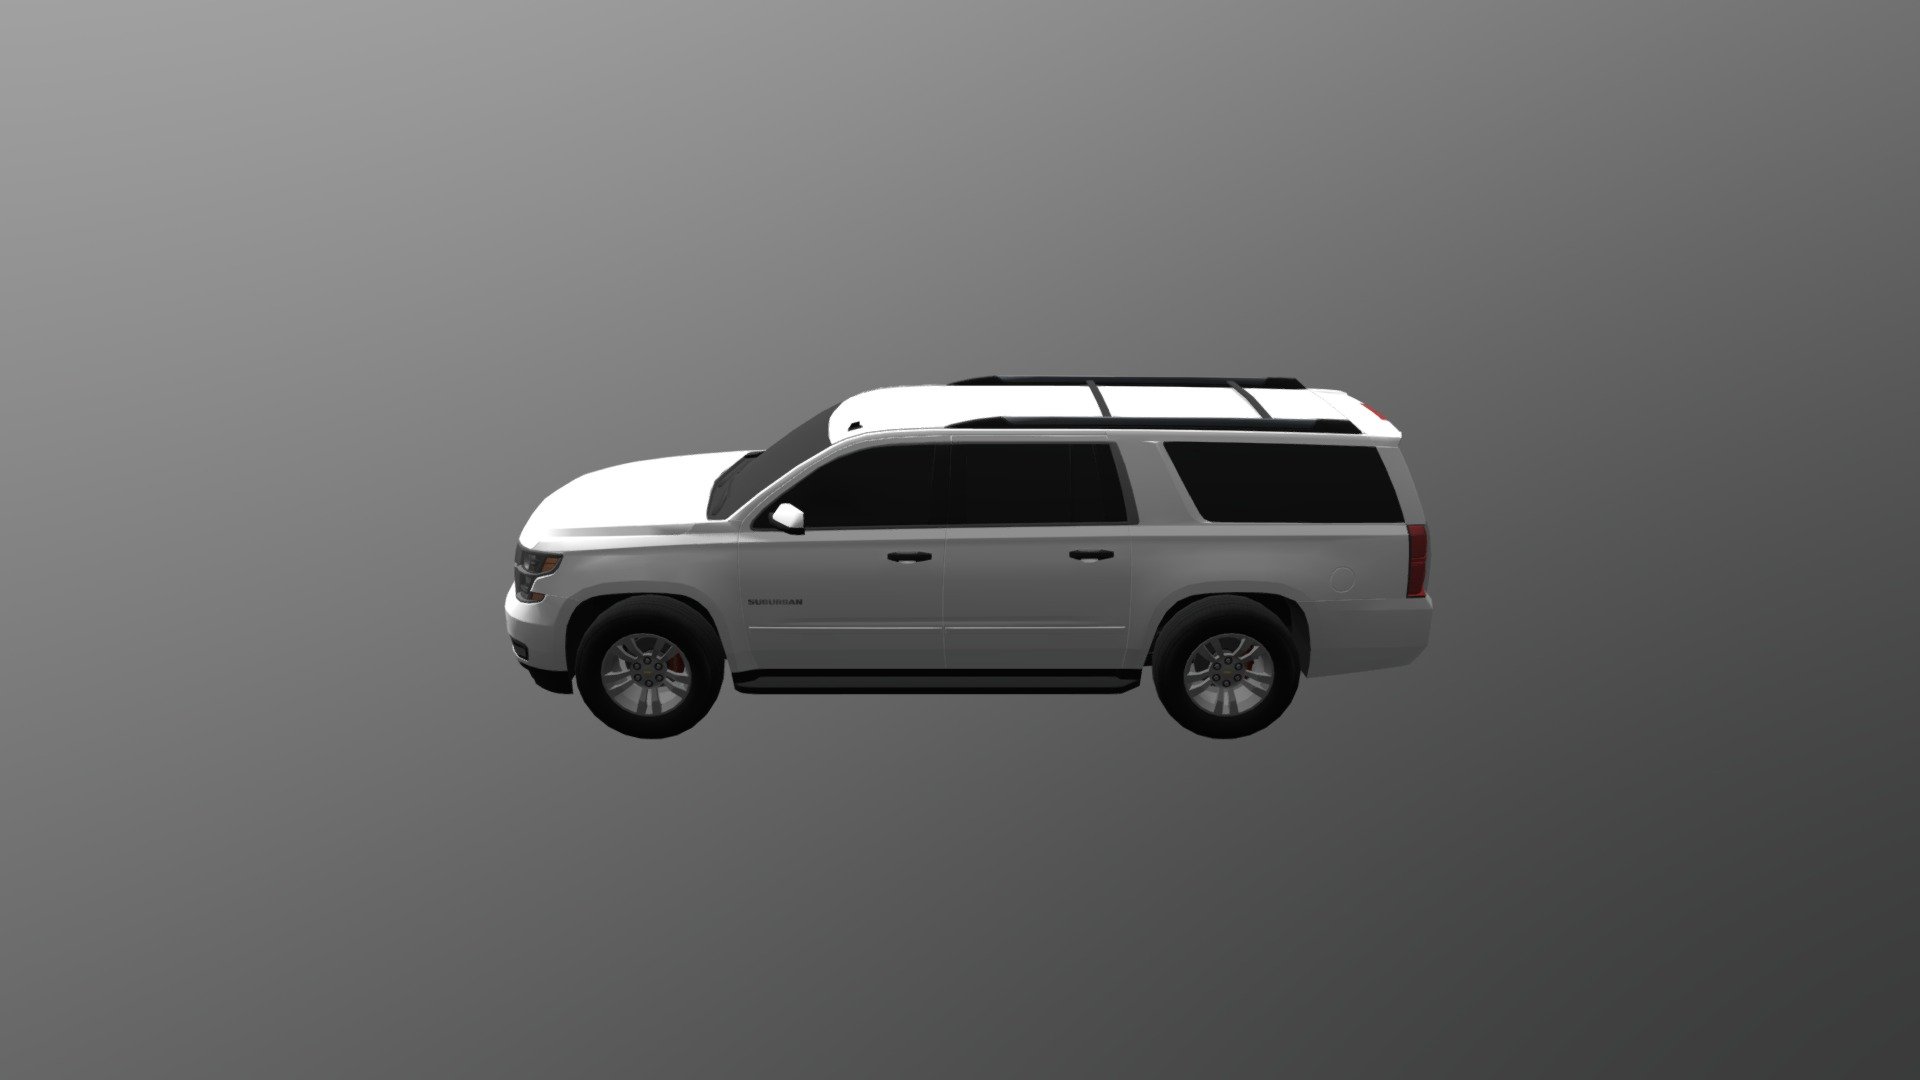 Polys: 67473
Verts: 95867 - Chevrolet Suburban 2015 - Download Free 3D model by shady311 3d model